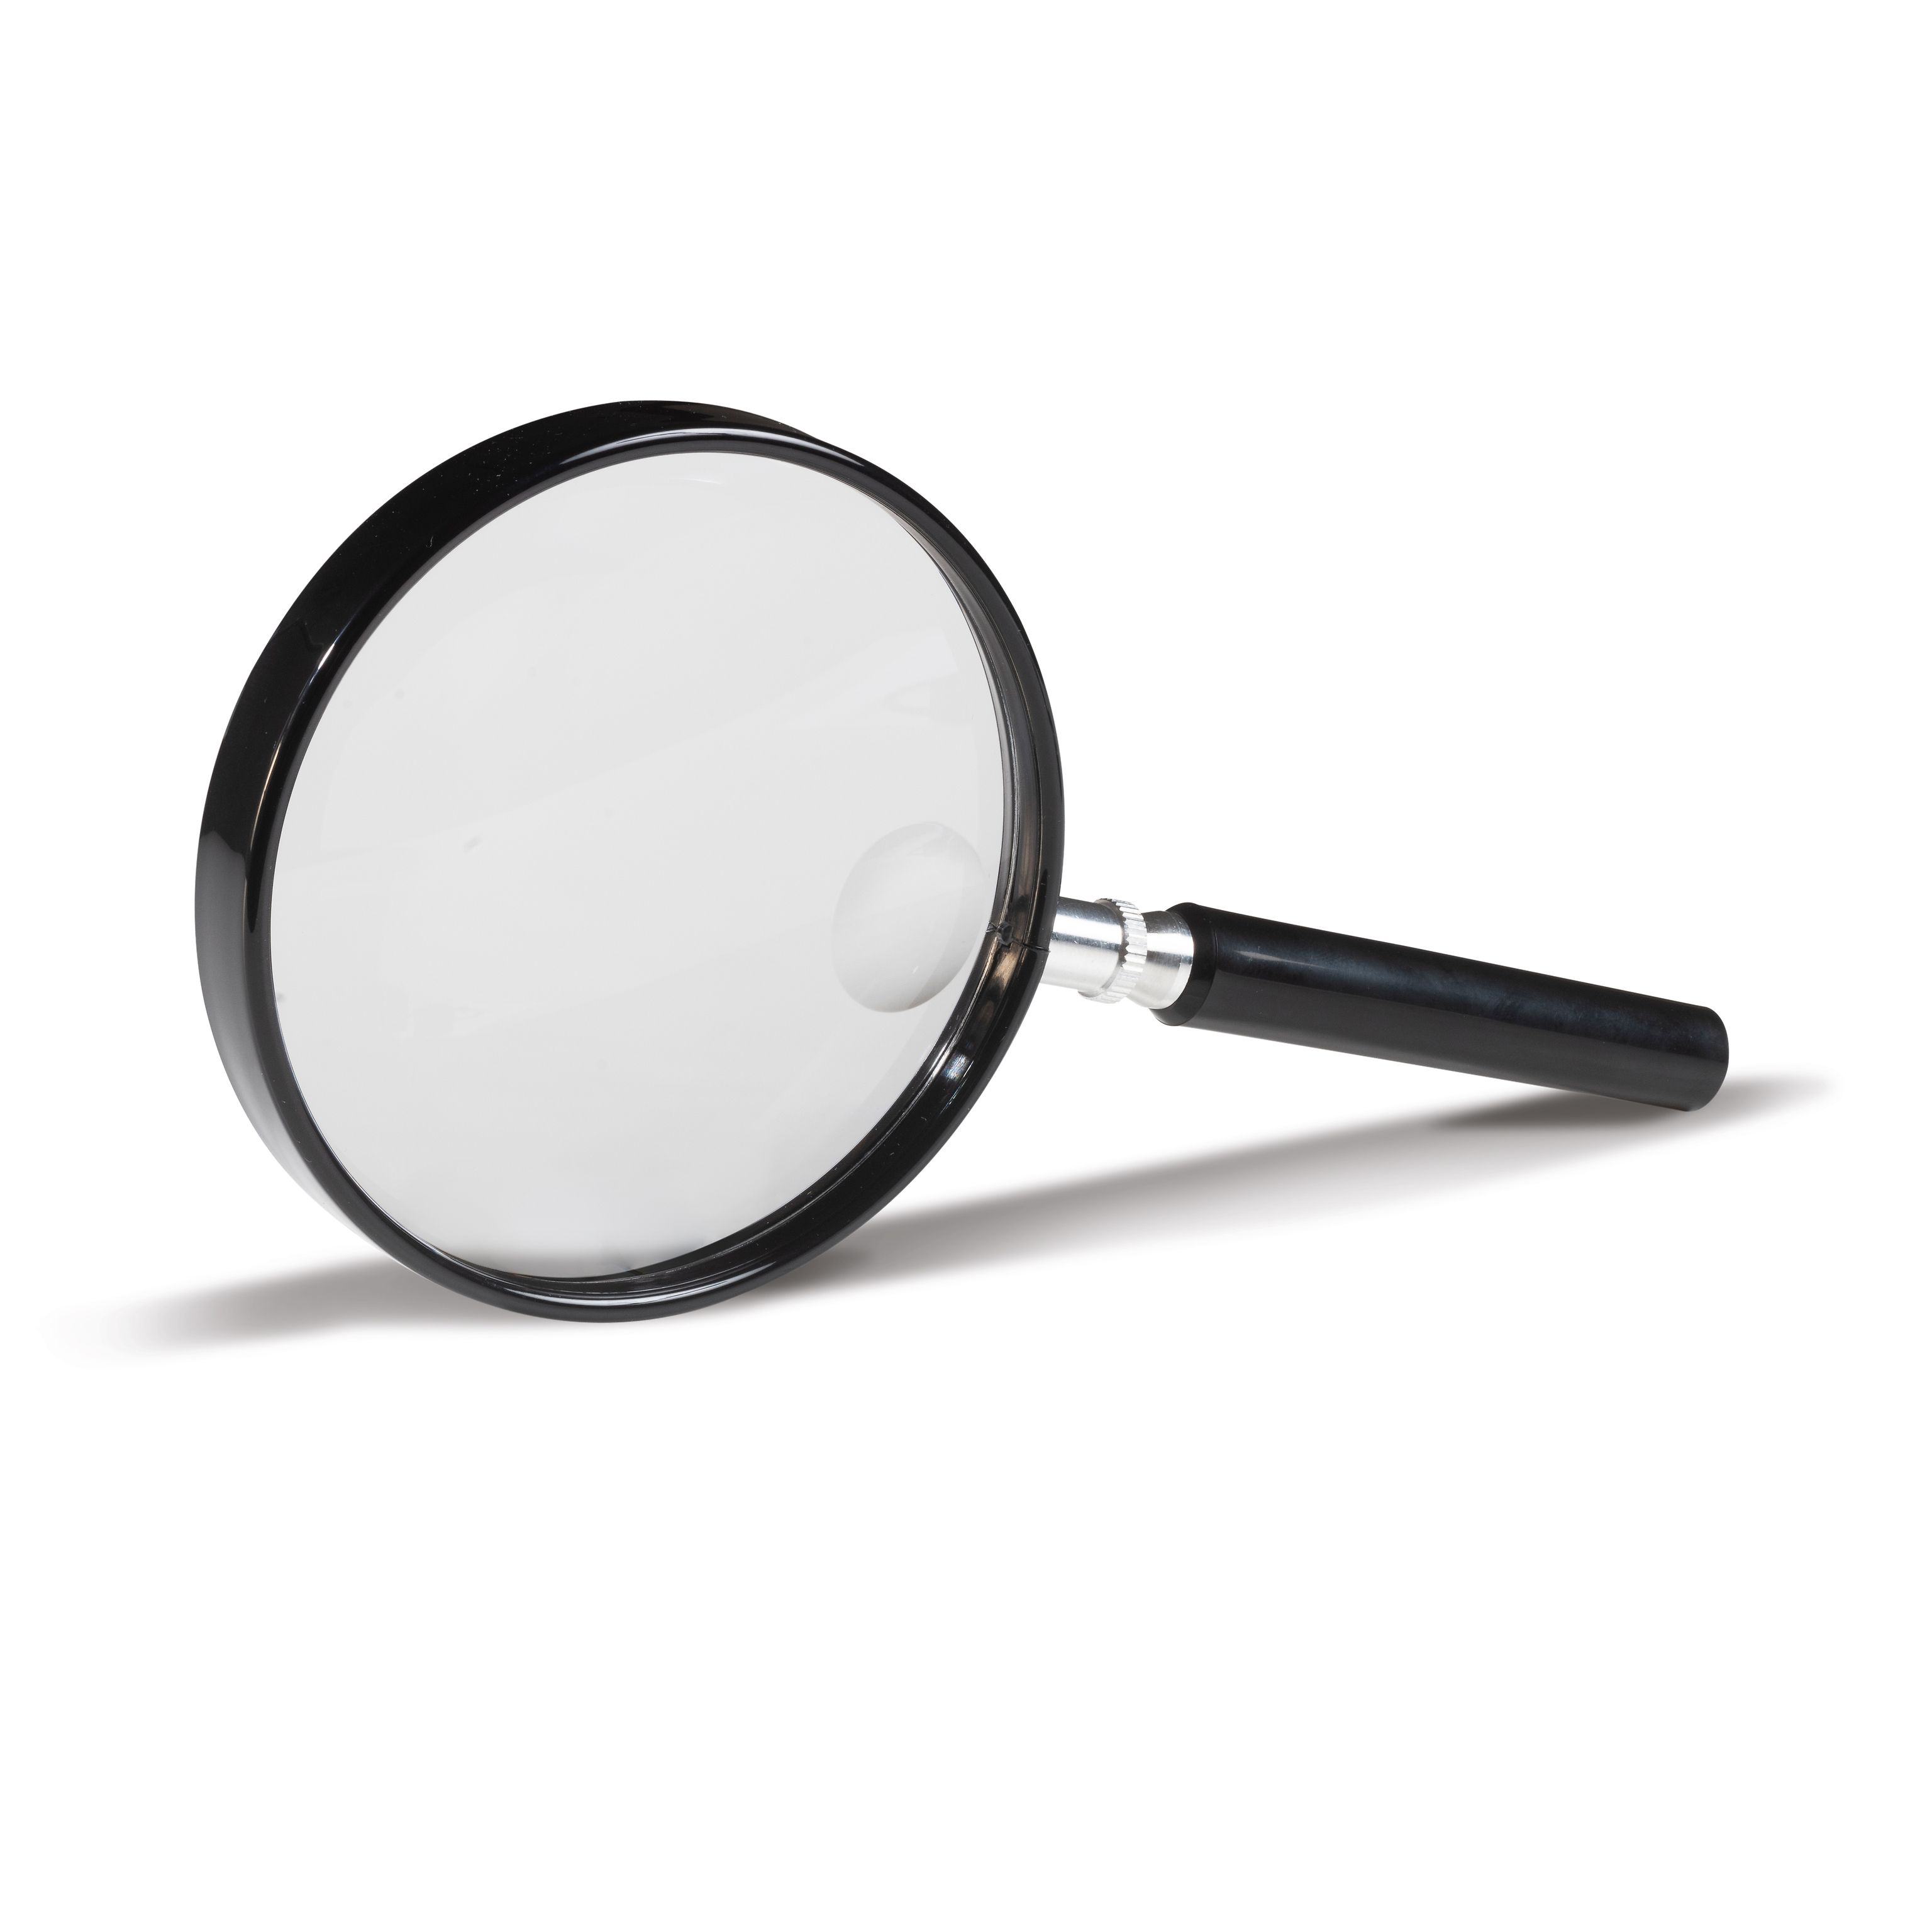 Highly Polished Pocket Magnifying Glass Magnification 2 2.5